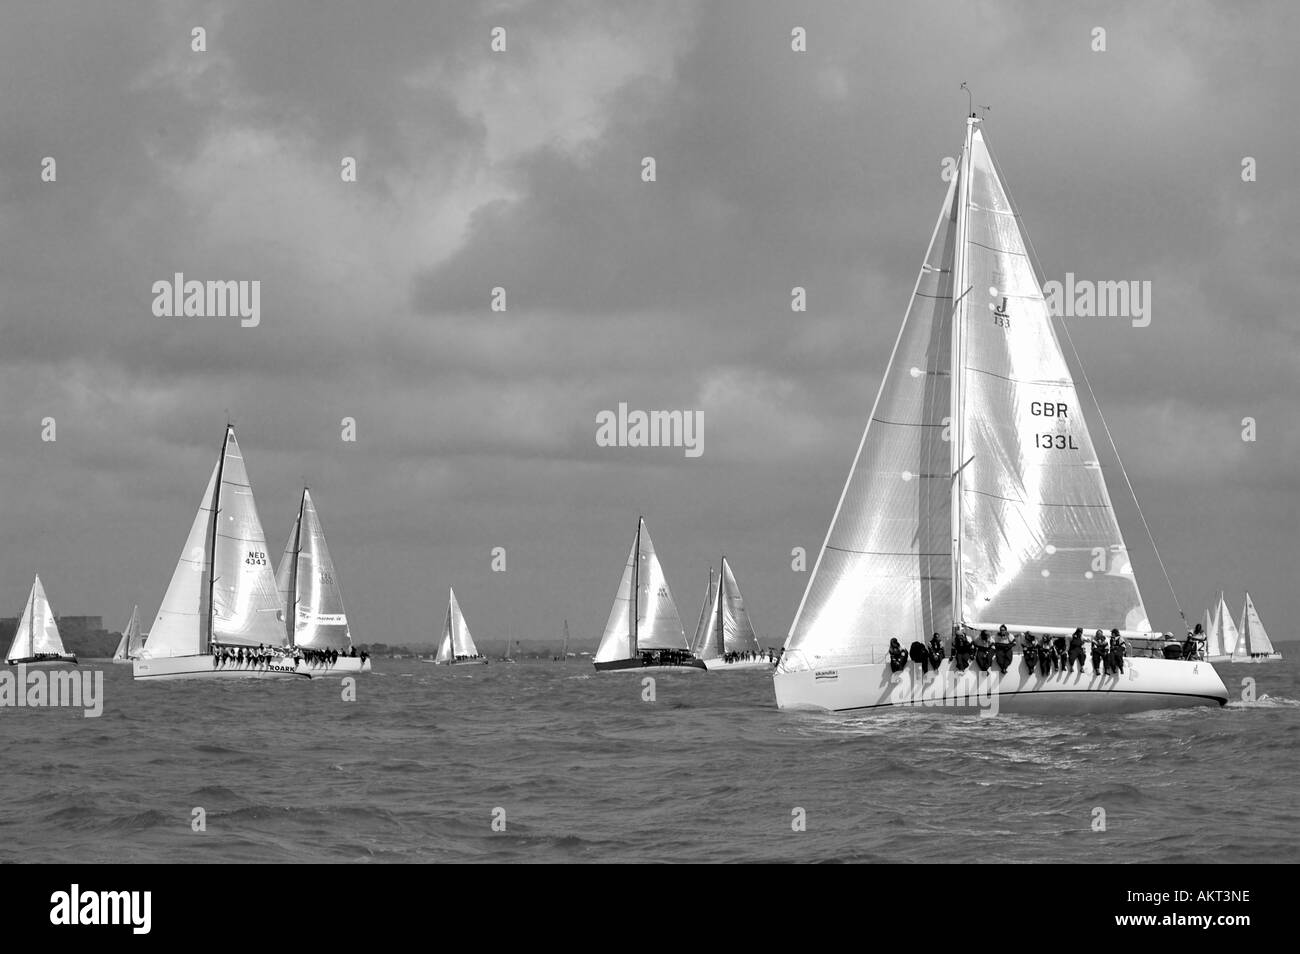 Cowes Woche Racing, Cowes, Isle of Wight, England, UK, GB. Stockfoto